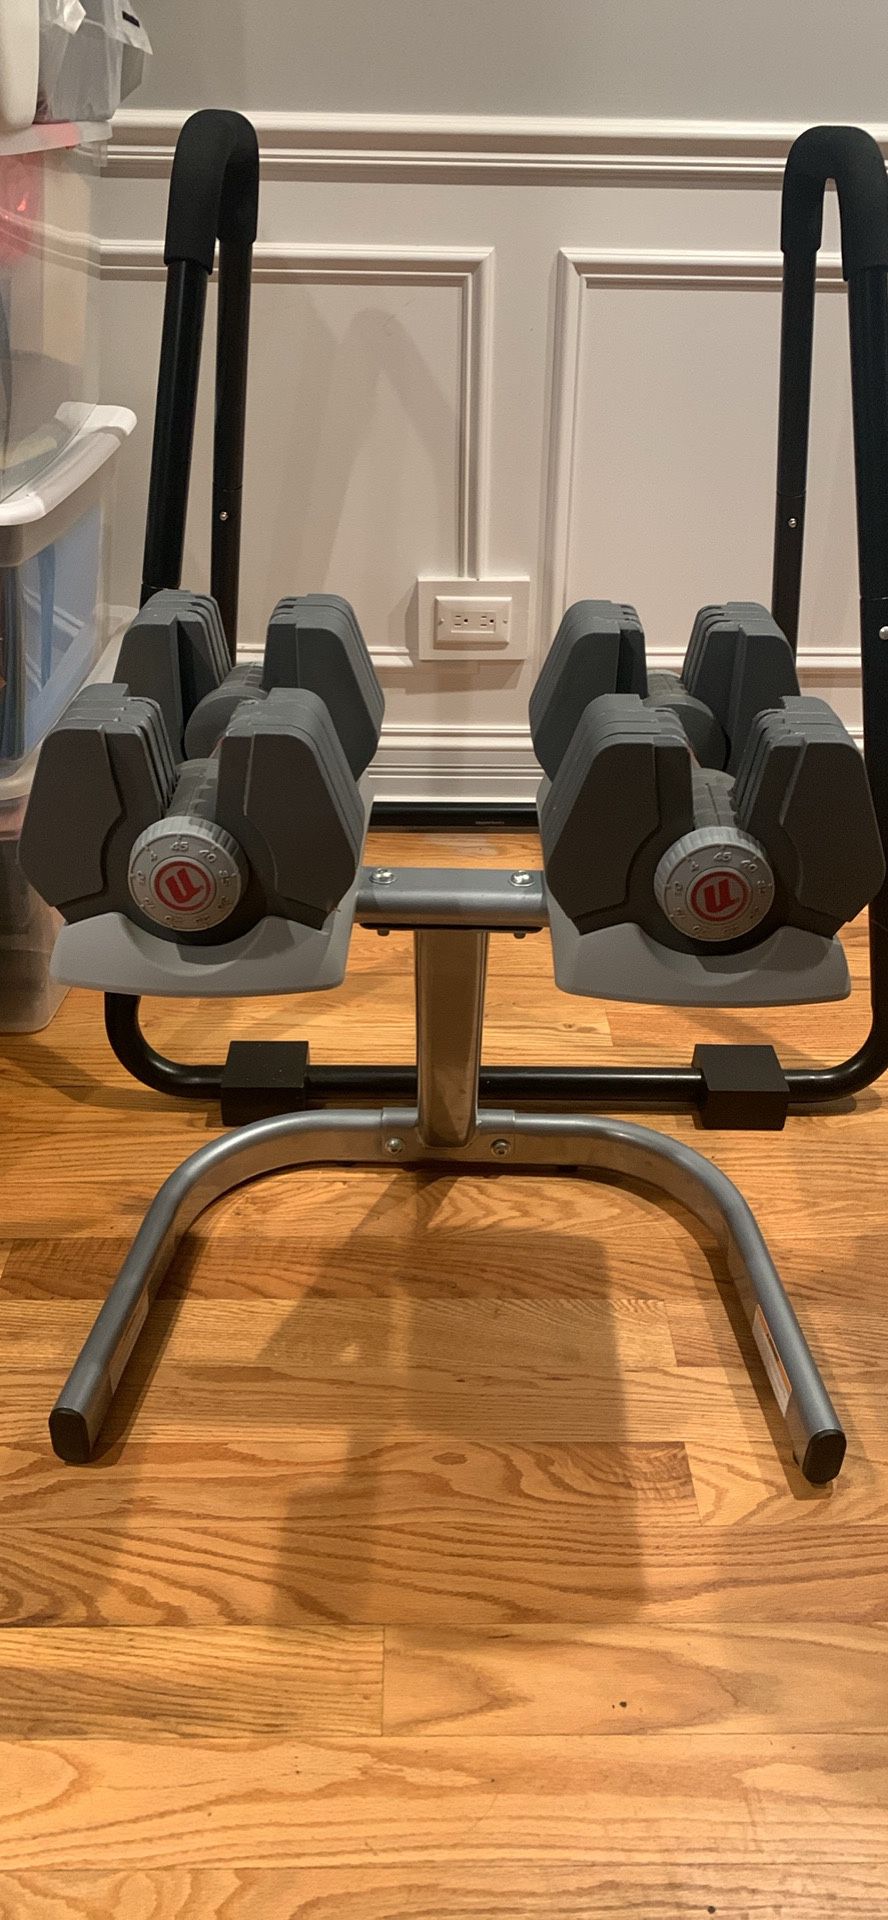 2 Nautilus Adjustable 45lbs Each Dumbbell With Stand 